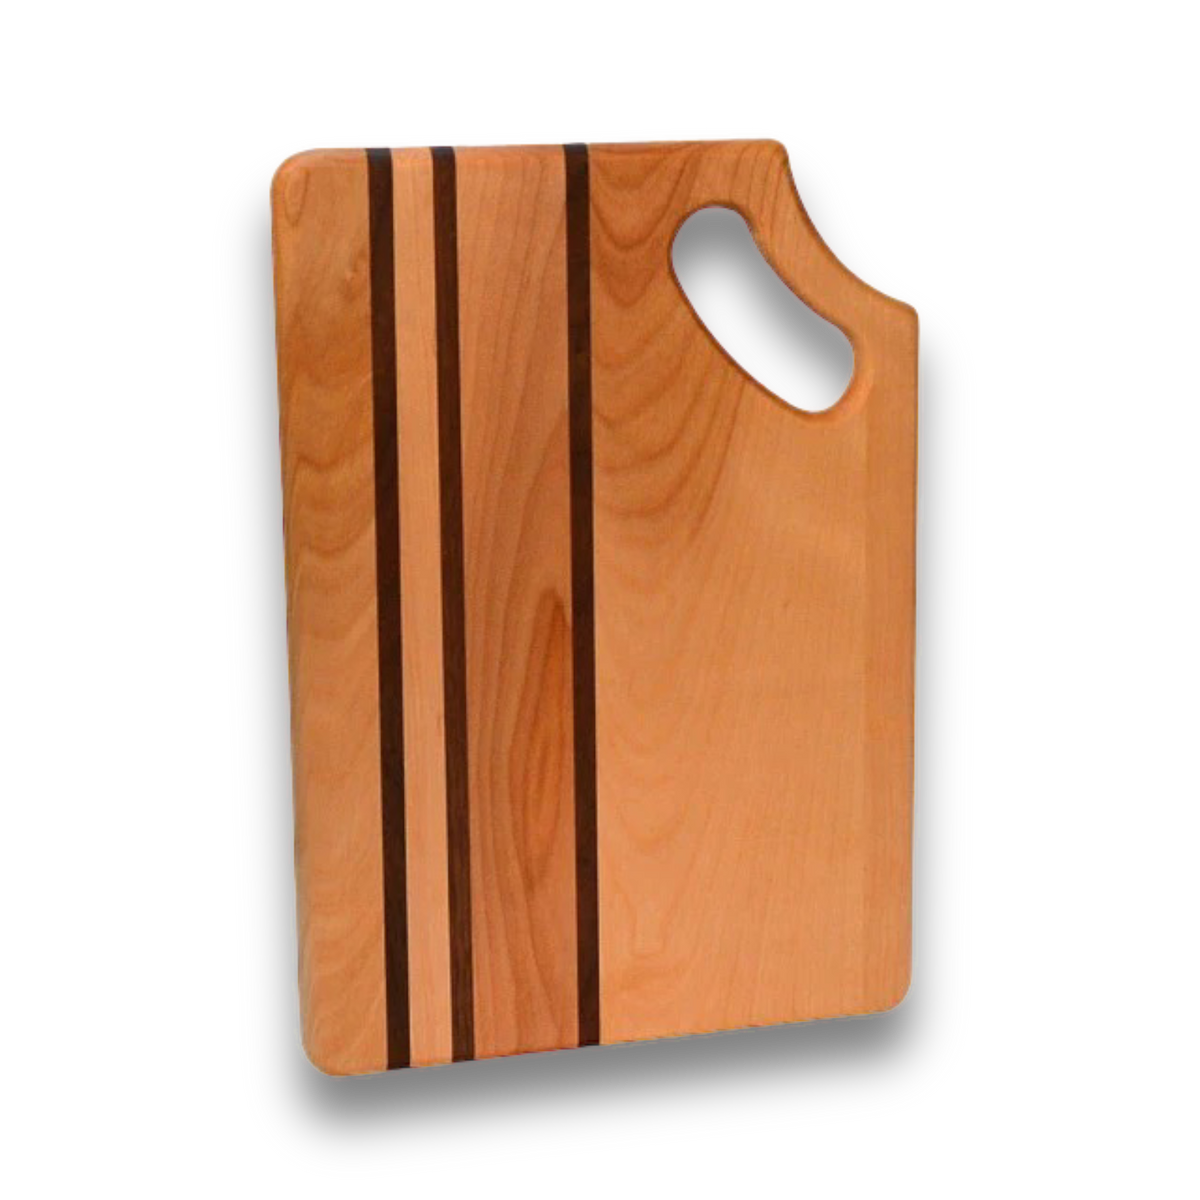 Plain Cutting Board for Chopping and Slicing, Designed by John McLeod